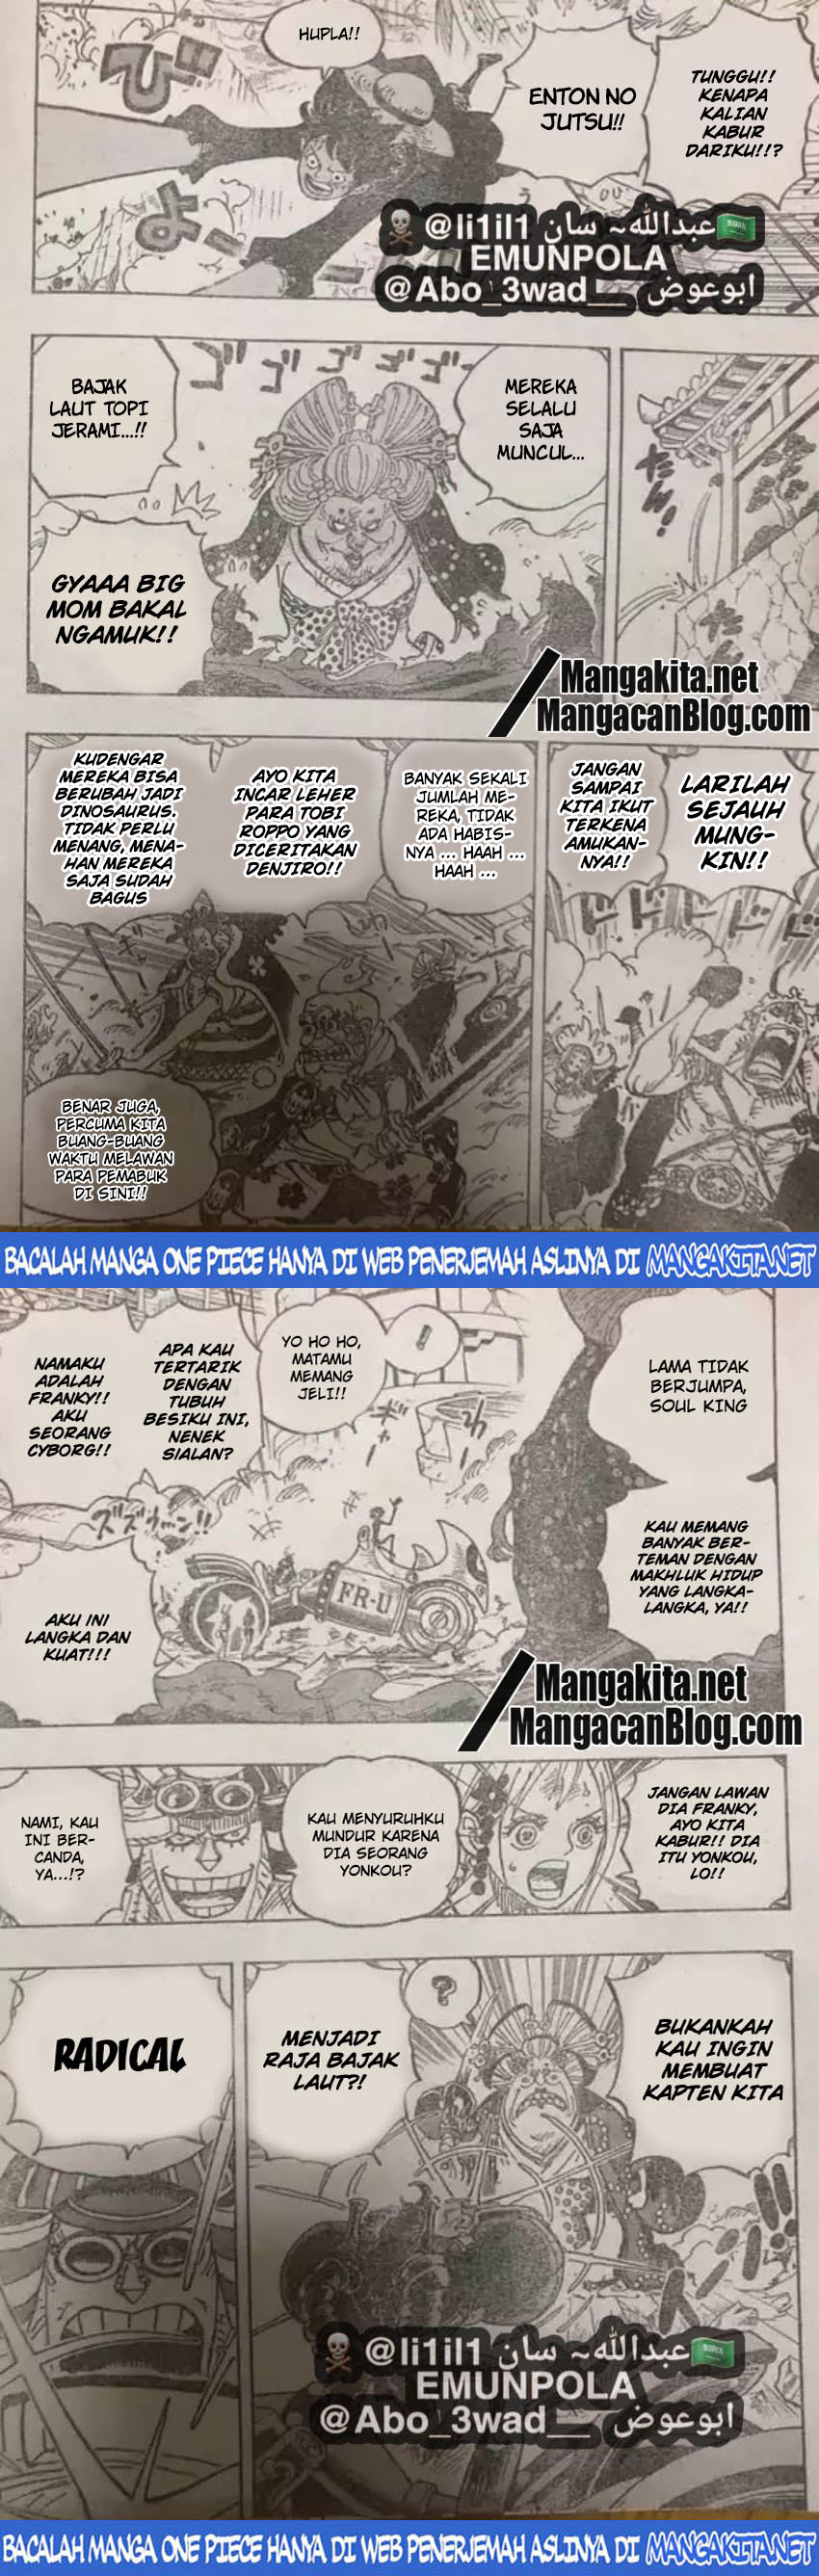 One Piece Chapter 989 (LQ)